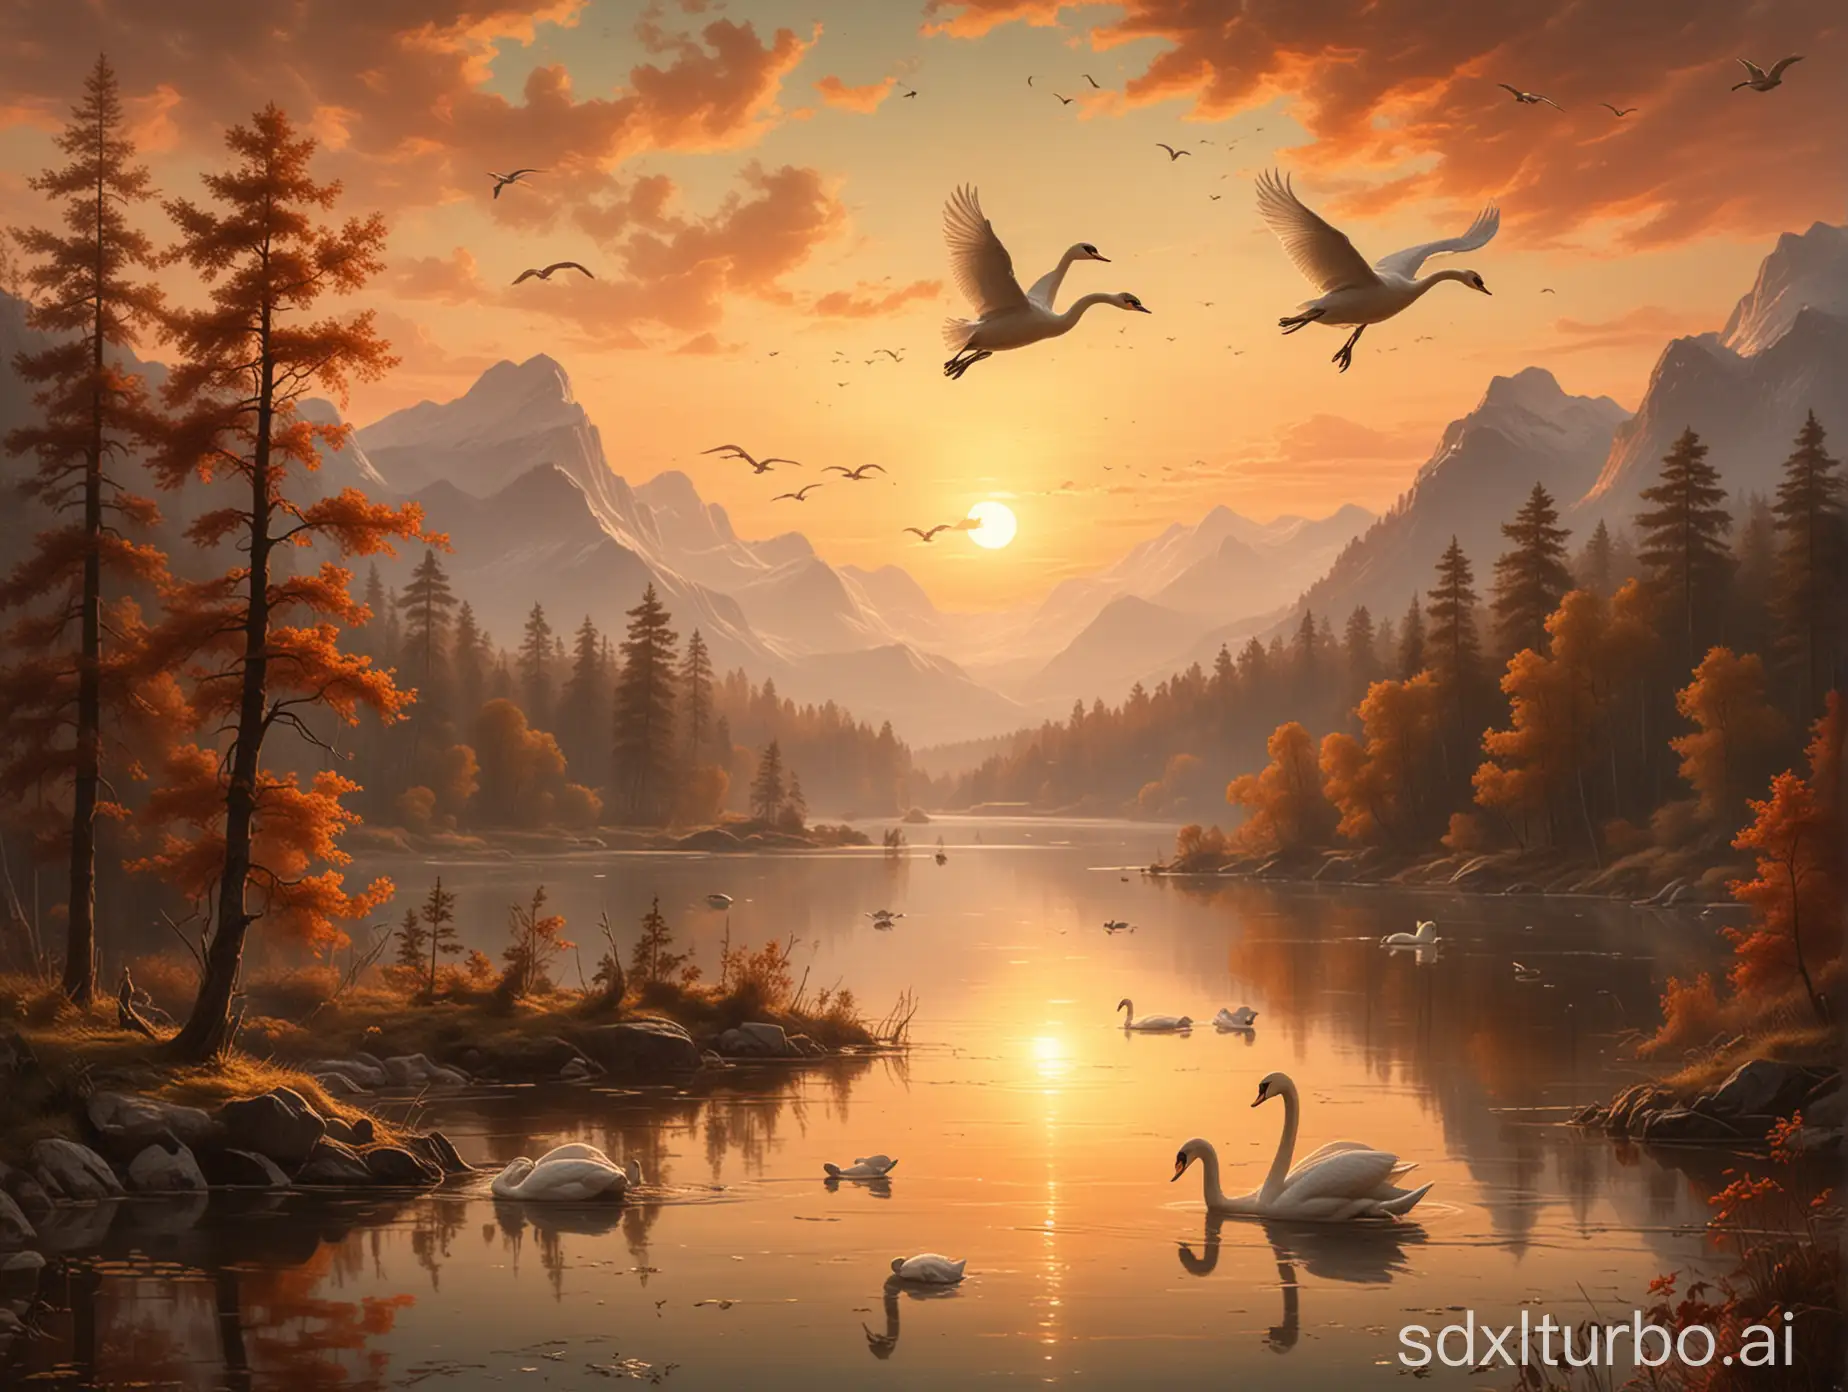 Flying swans backlit by the sunset over a beautiful landscape of forests, mountains and lakes, in the style of Johann Jakob Frey